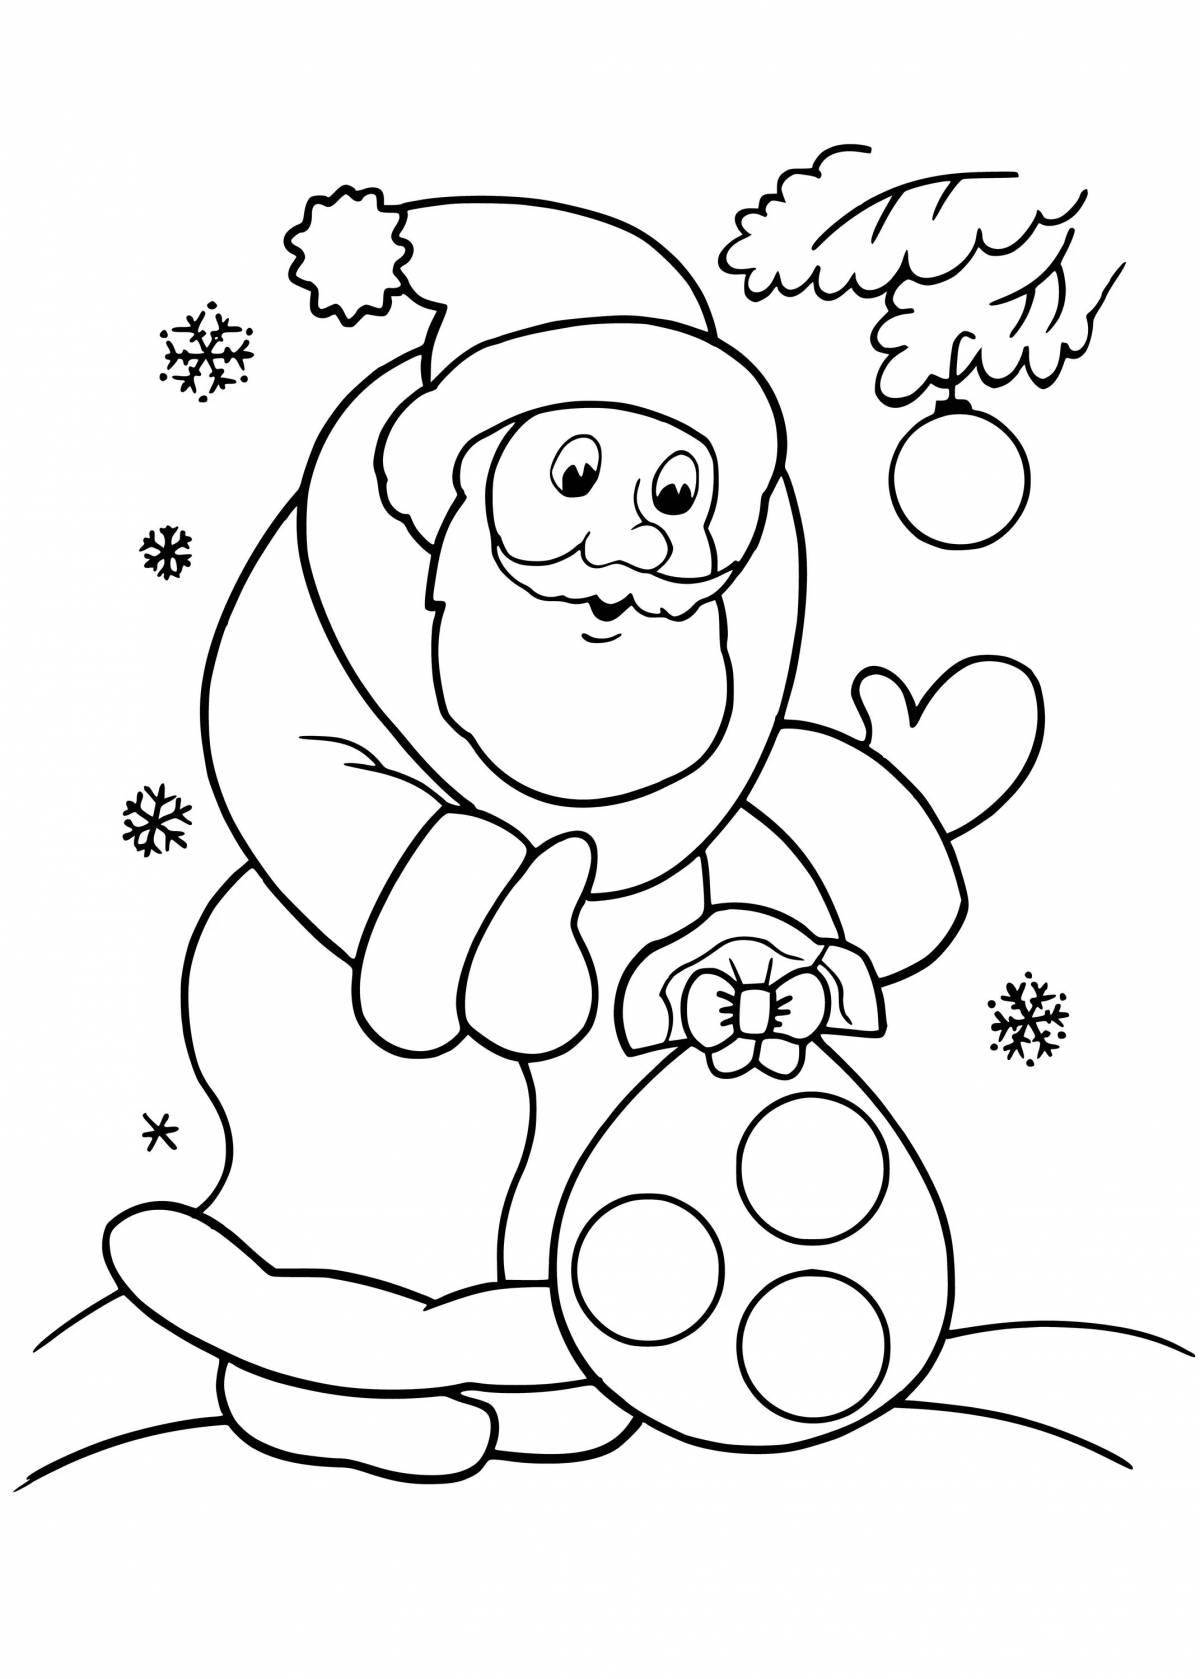 Charming children's Christmas coloring book